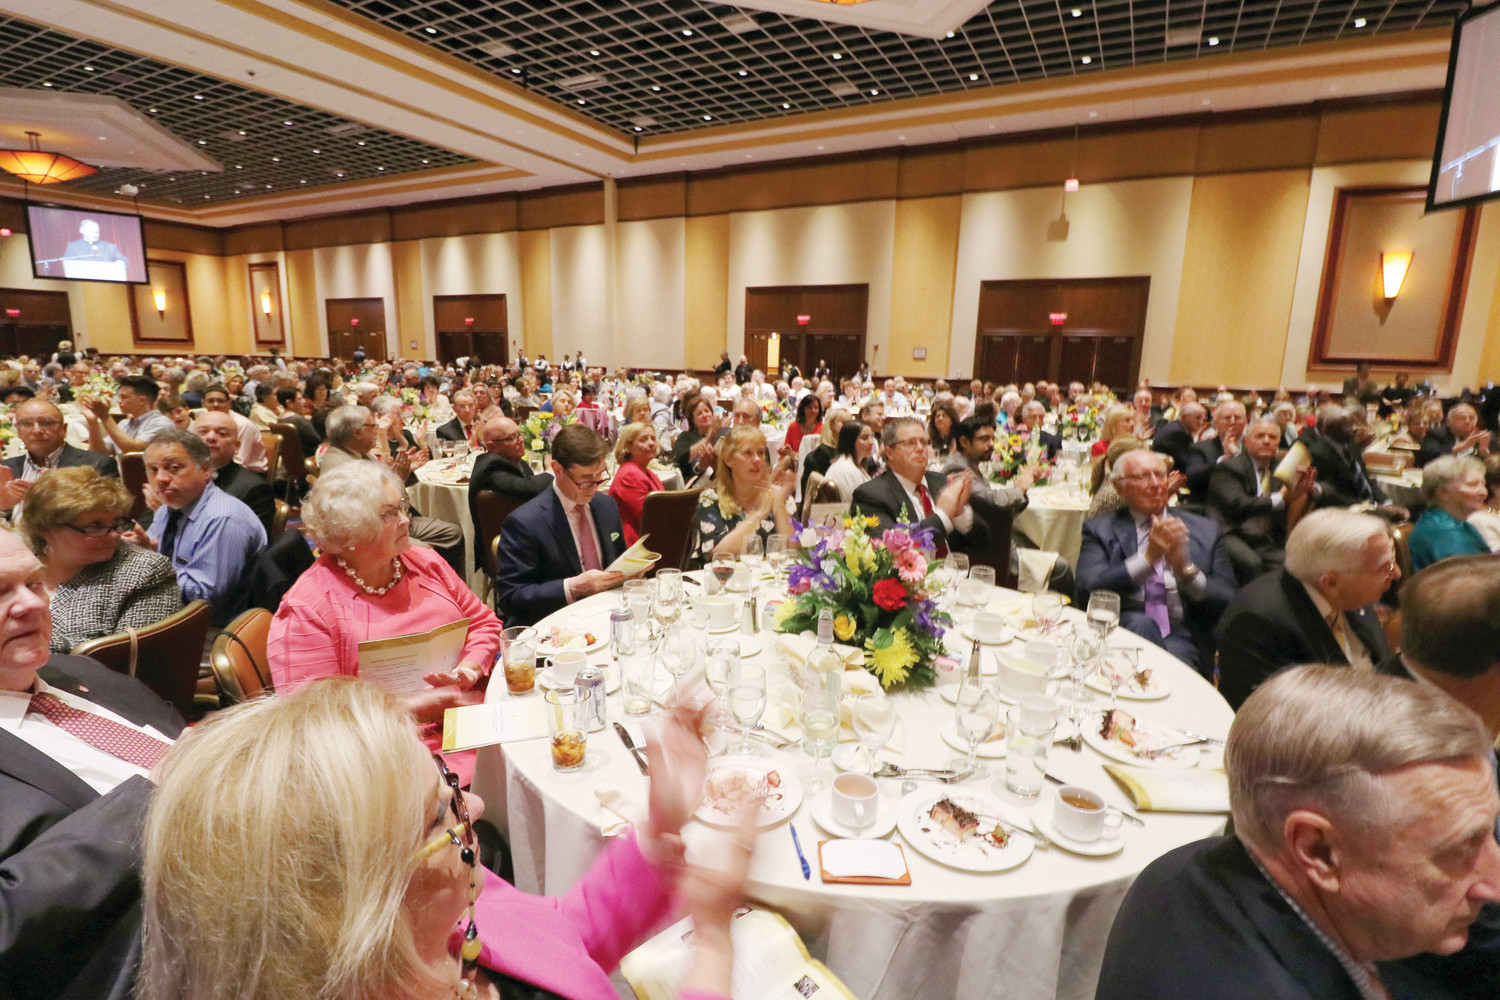 Hundreds gathered at Twin River Event Center on Wednesday, May 16, as Bishop Thomas J. Tobin presented Lumen Gentium Awards to 15 individuals and groups.